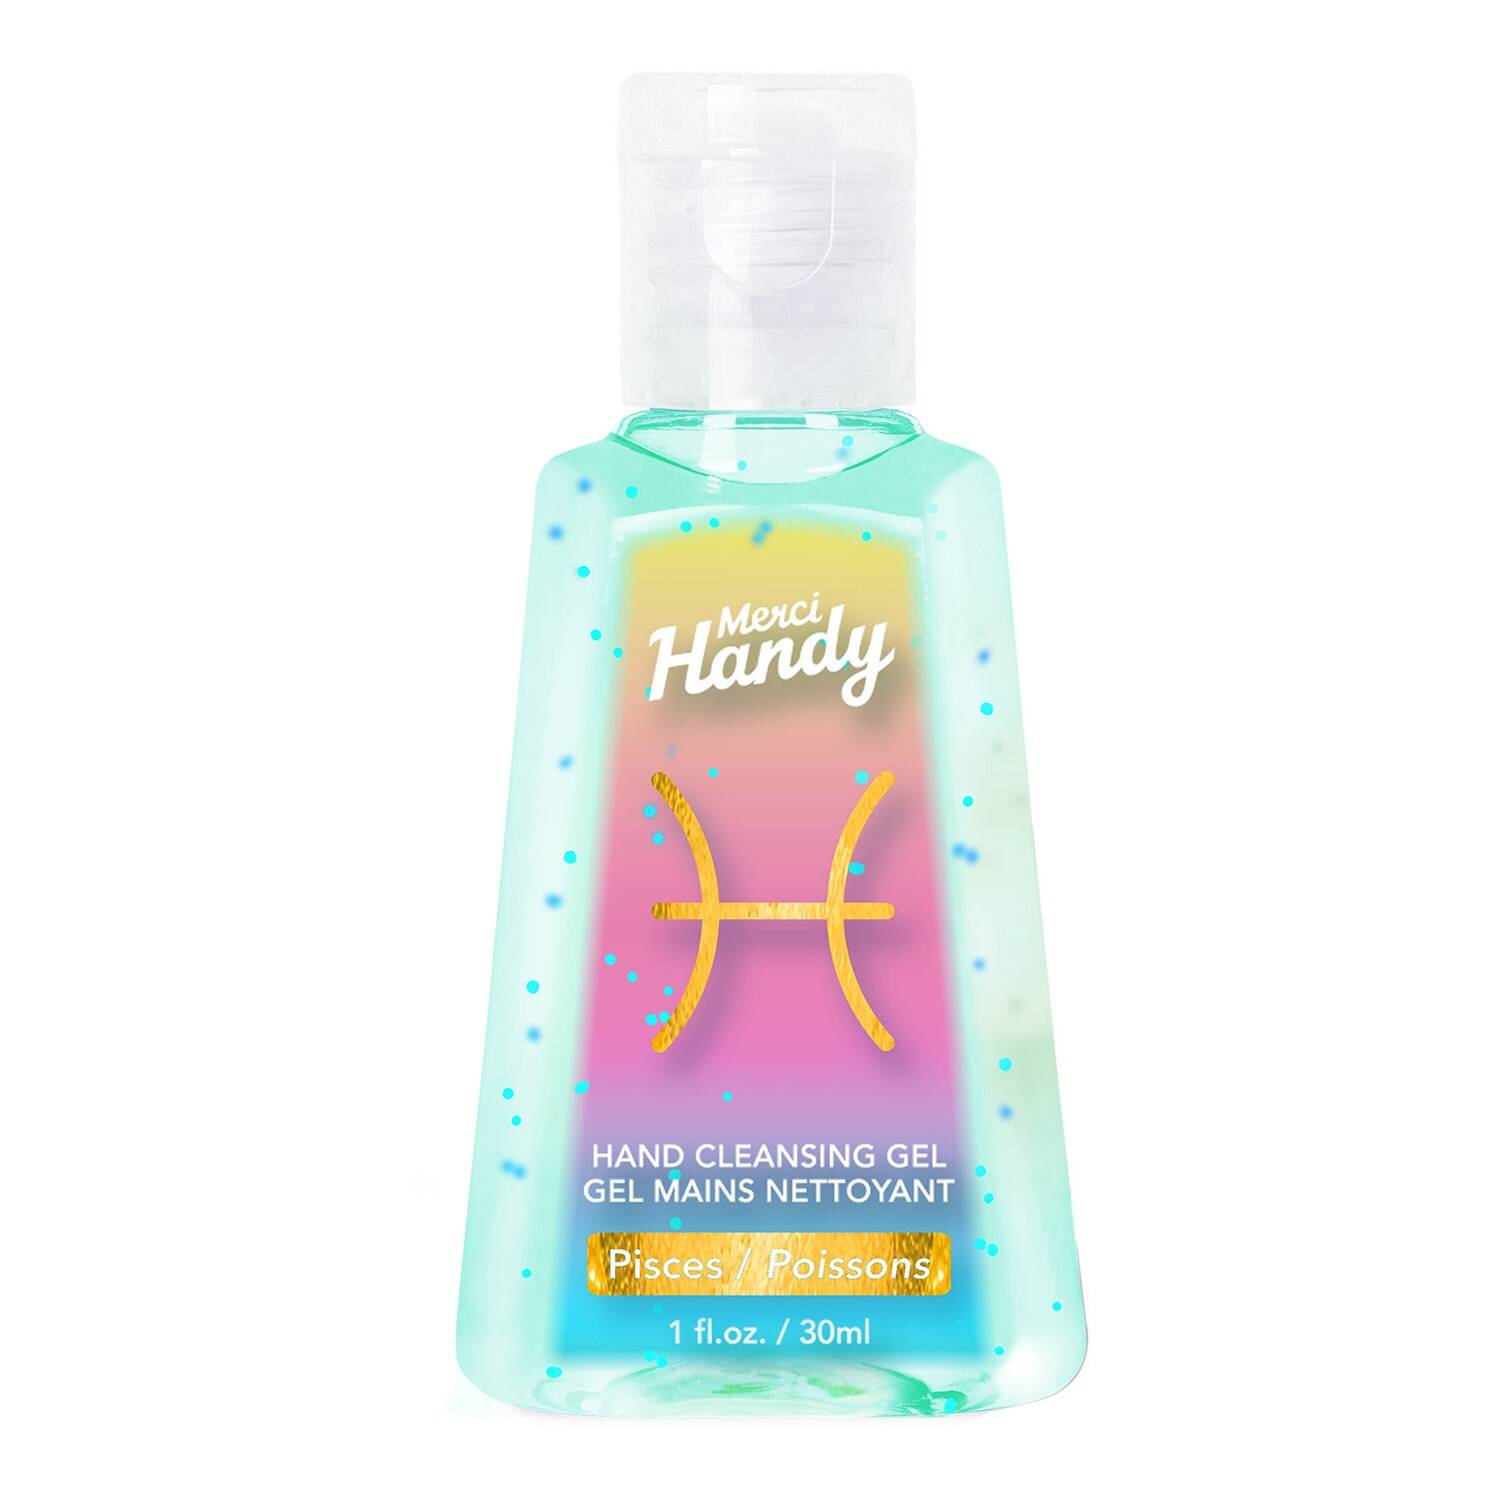 Merci Handy Hand Cleansing Gel - Zodiac Collection Astro Pisces